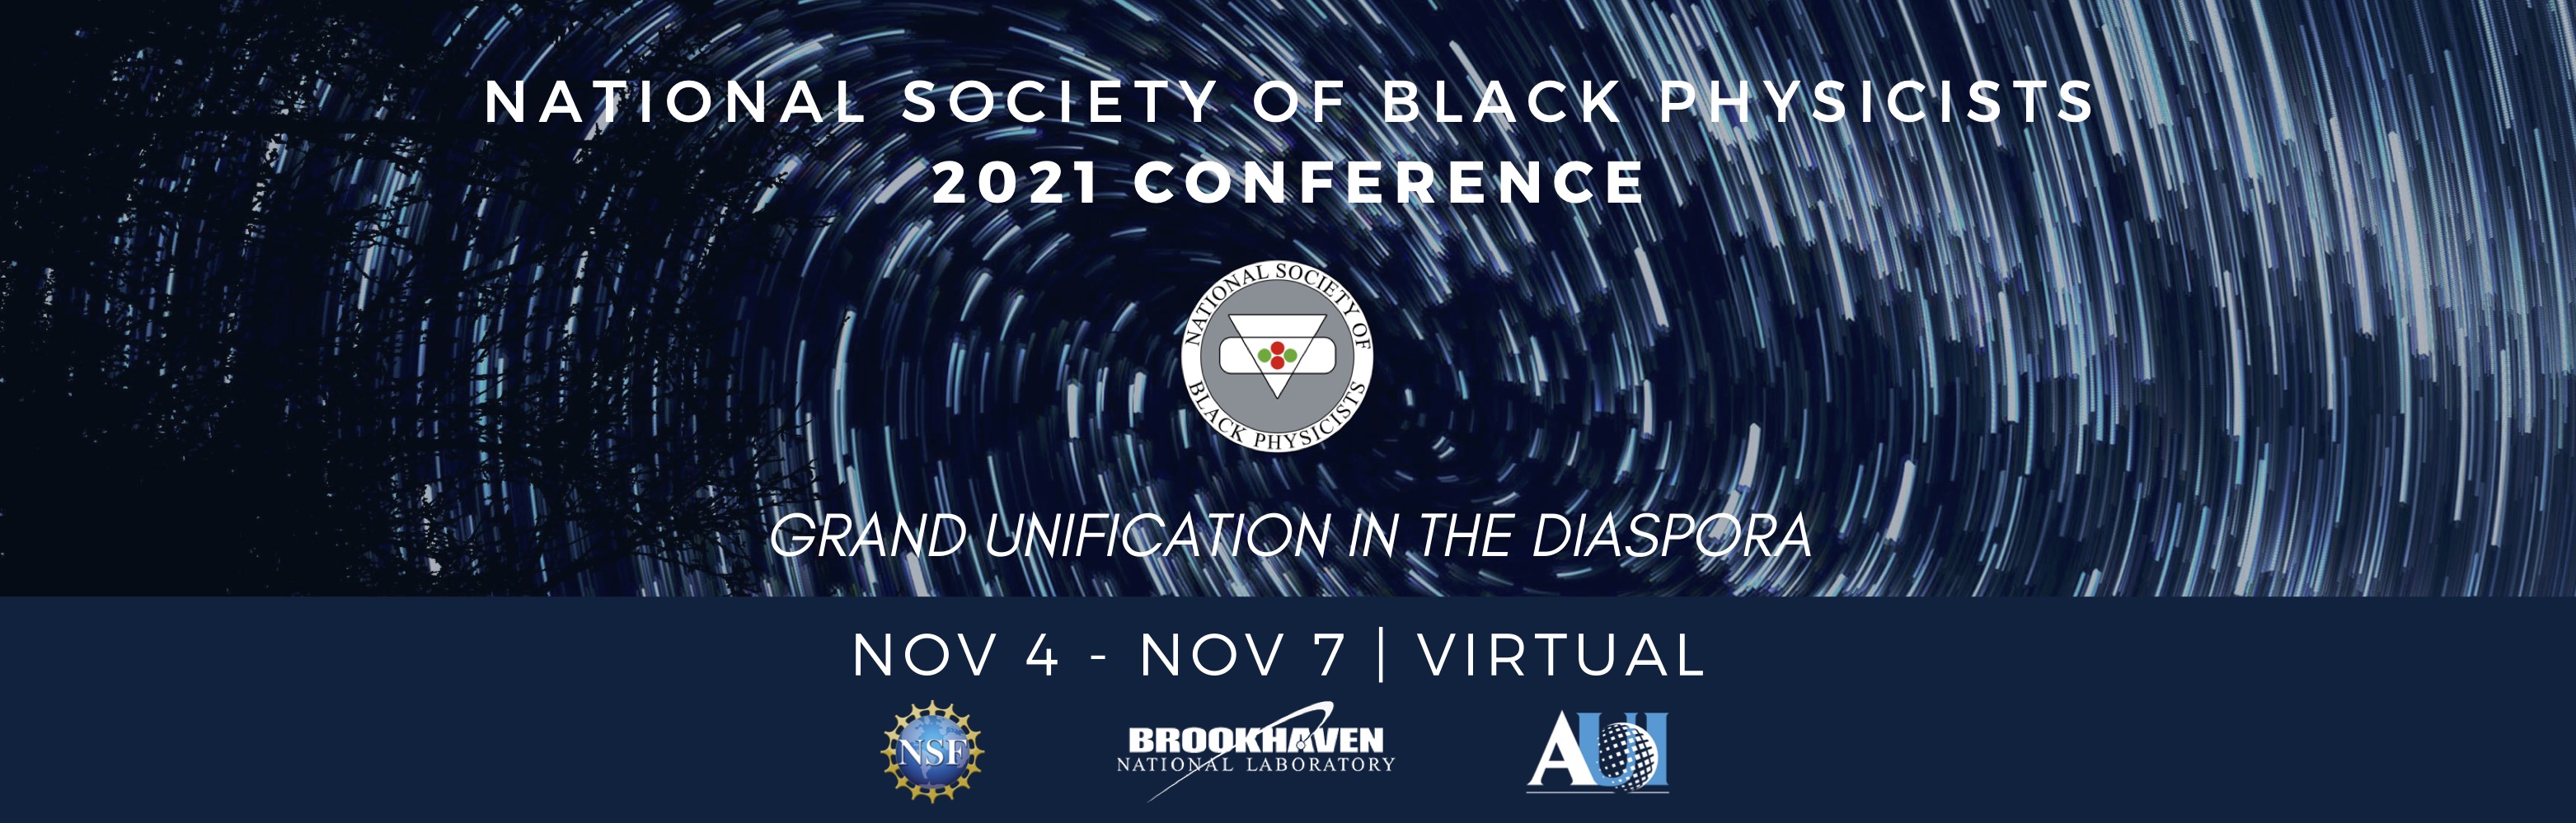 National Society of Black Physicists 2021 Conference